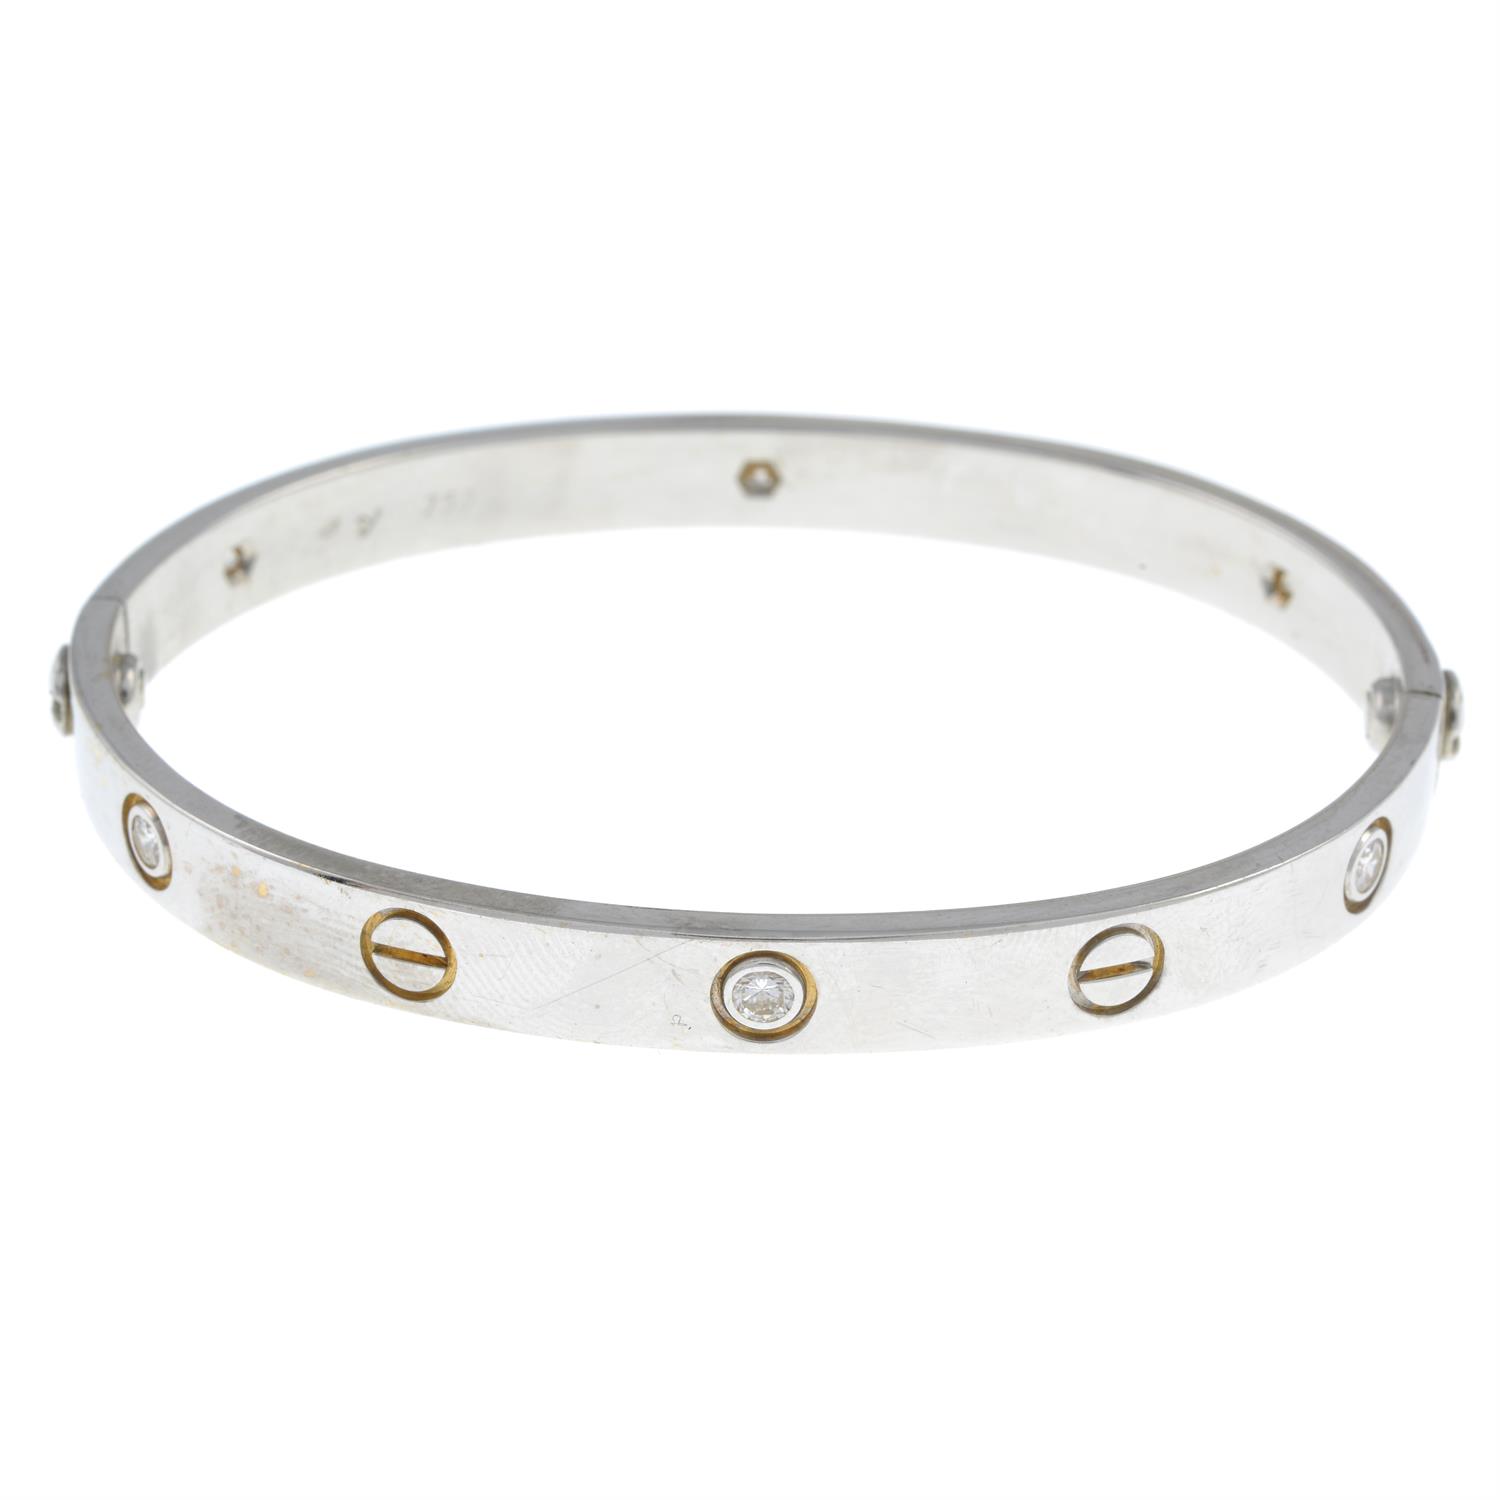 18ct gold diamond 'Love' bangle, by Cartier - Image 3 of 6